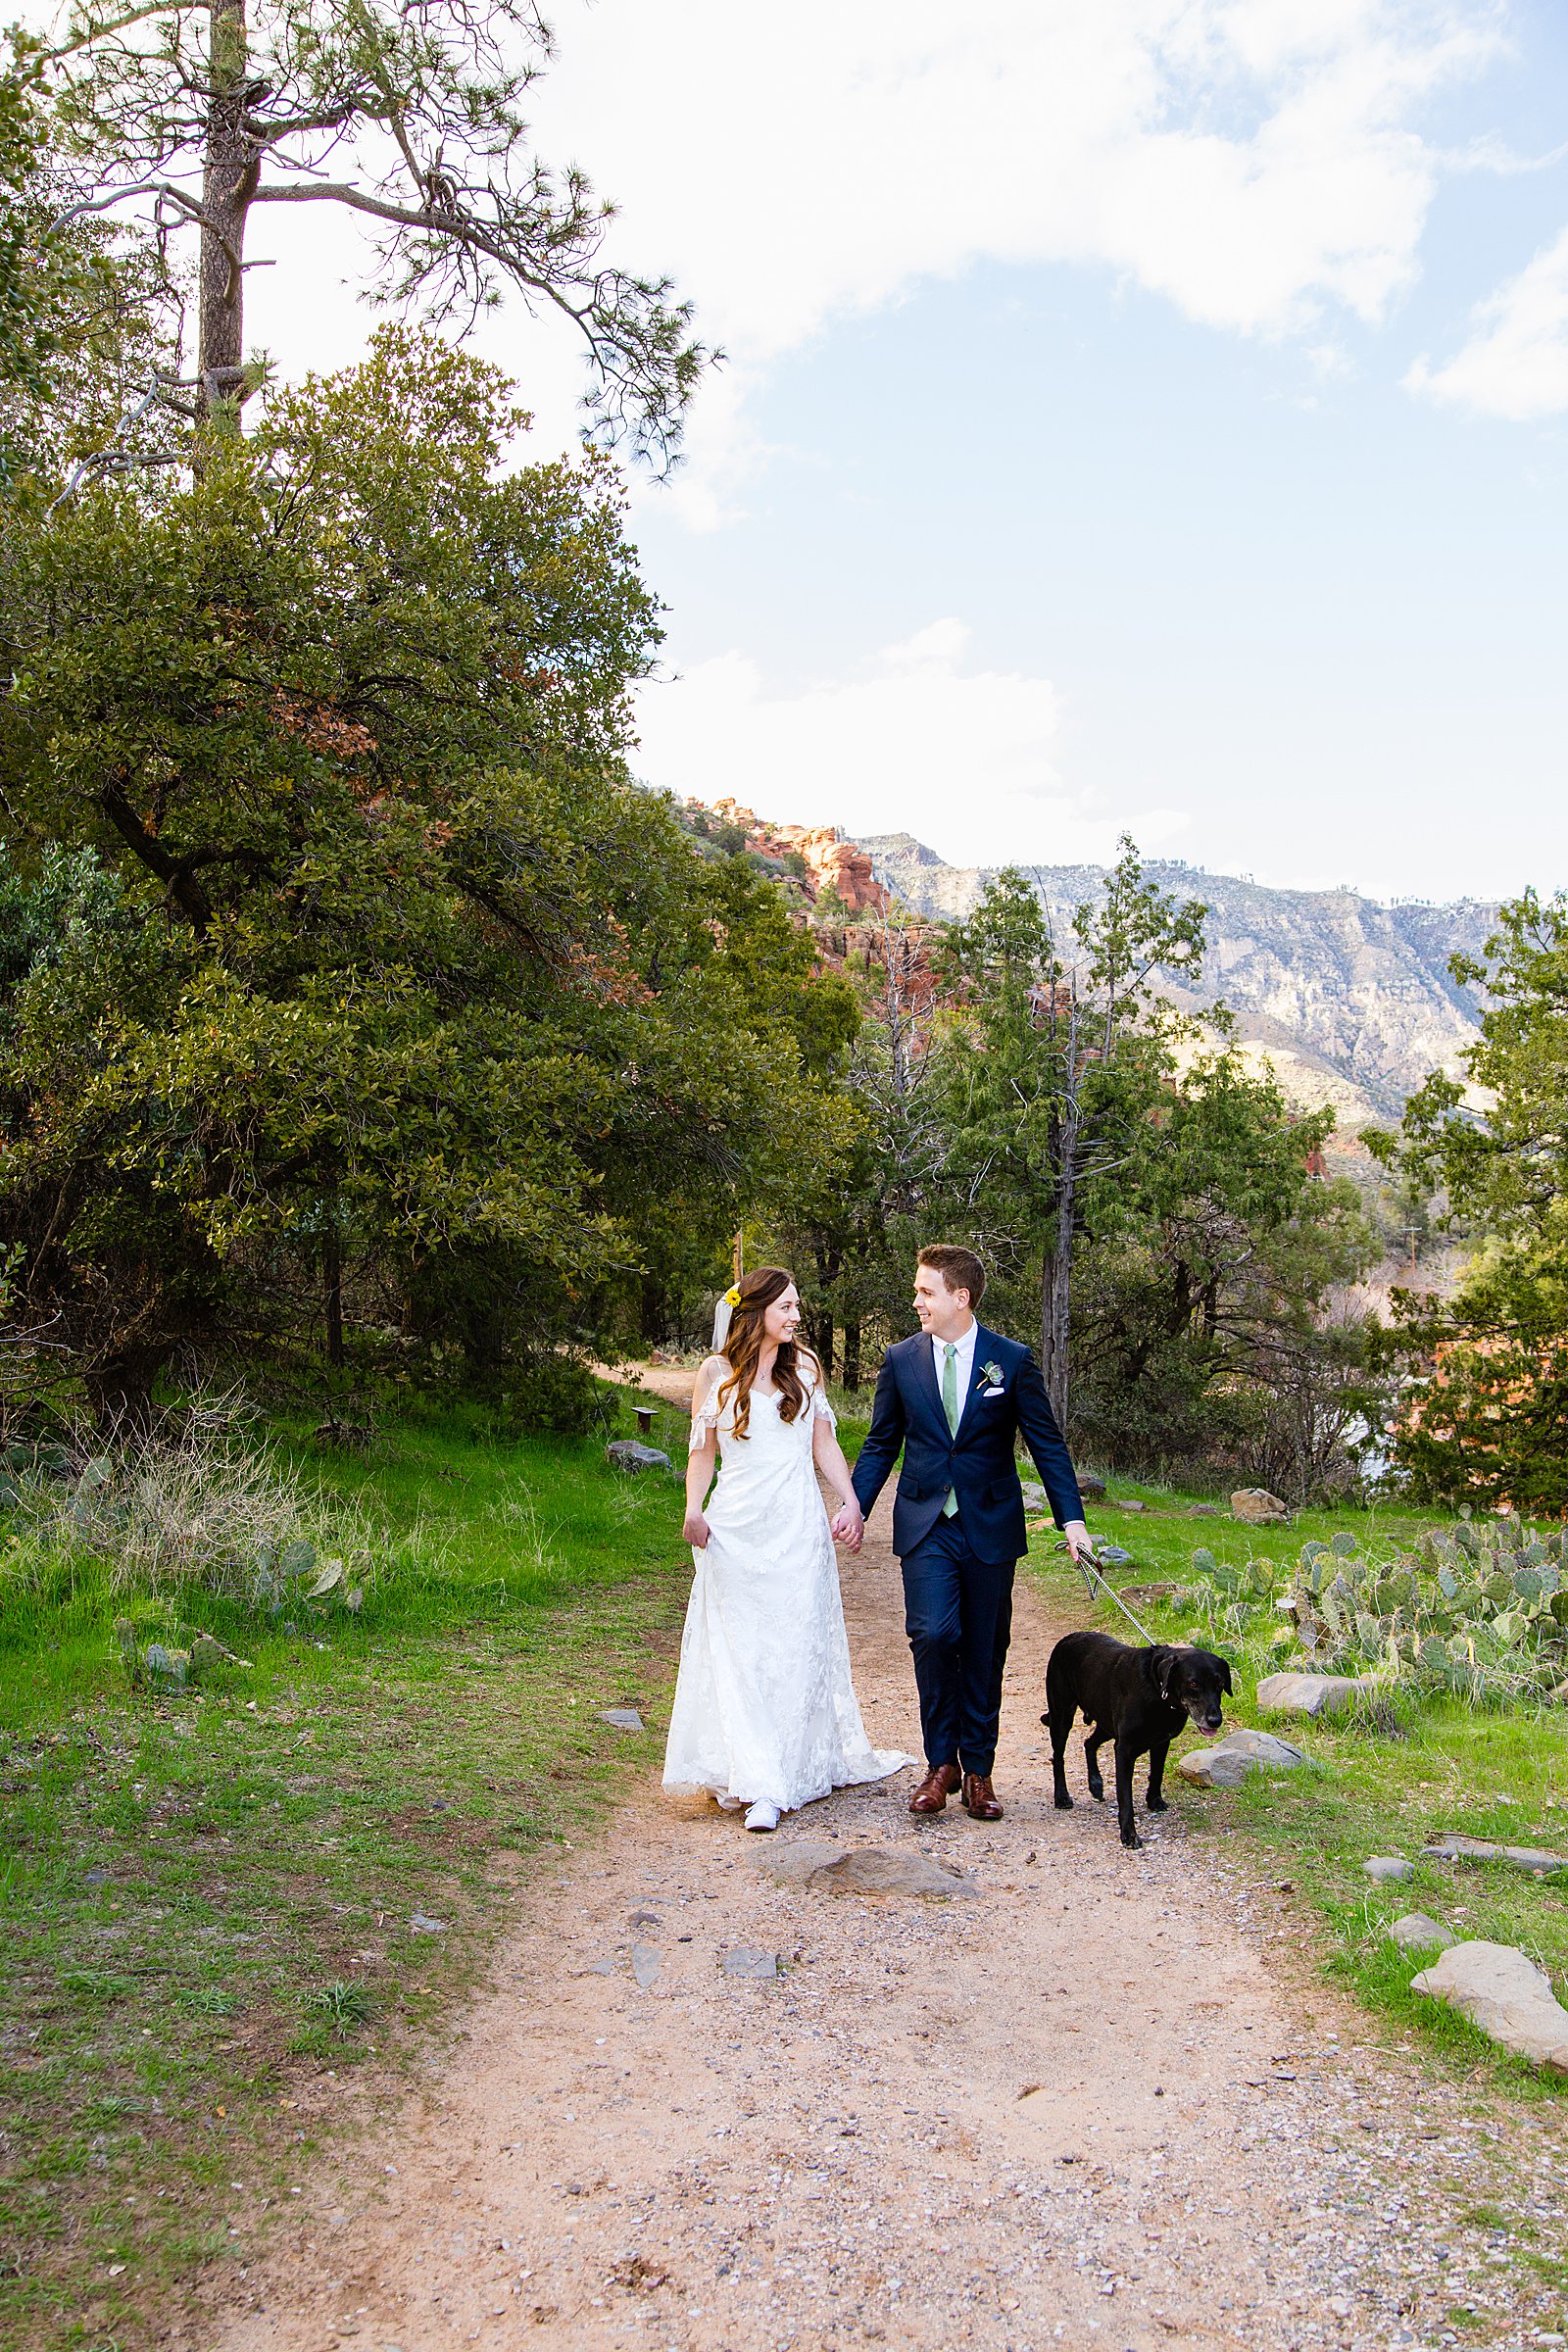 Bride and Groom walking together with their dog during their Slide Rock elopement by Sedona elopement photographer PMA Photography.